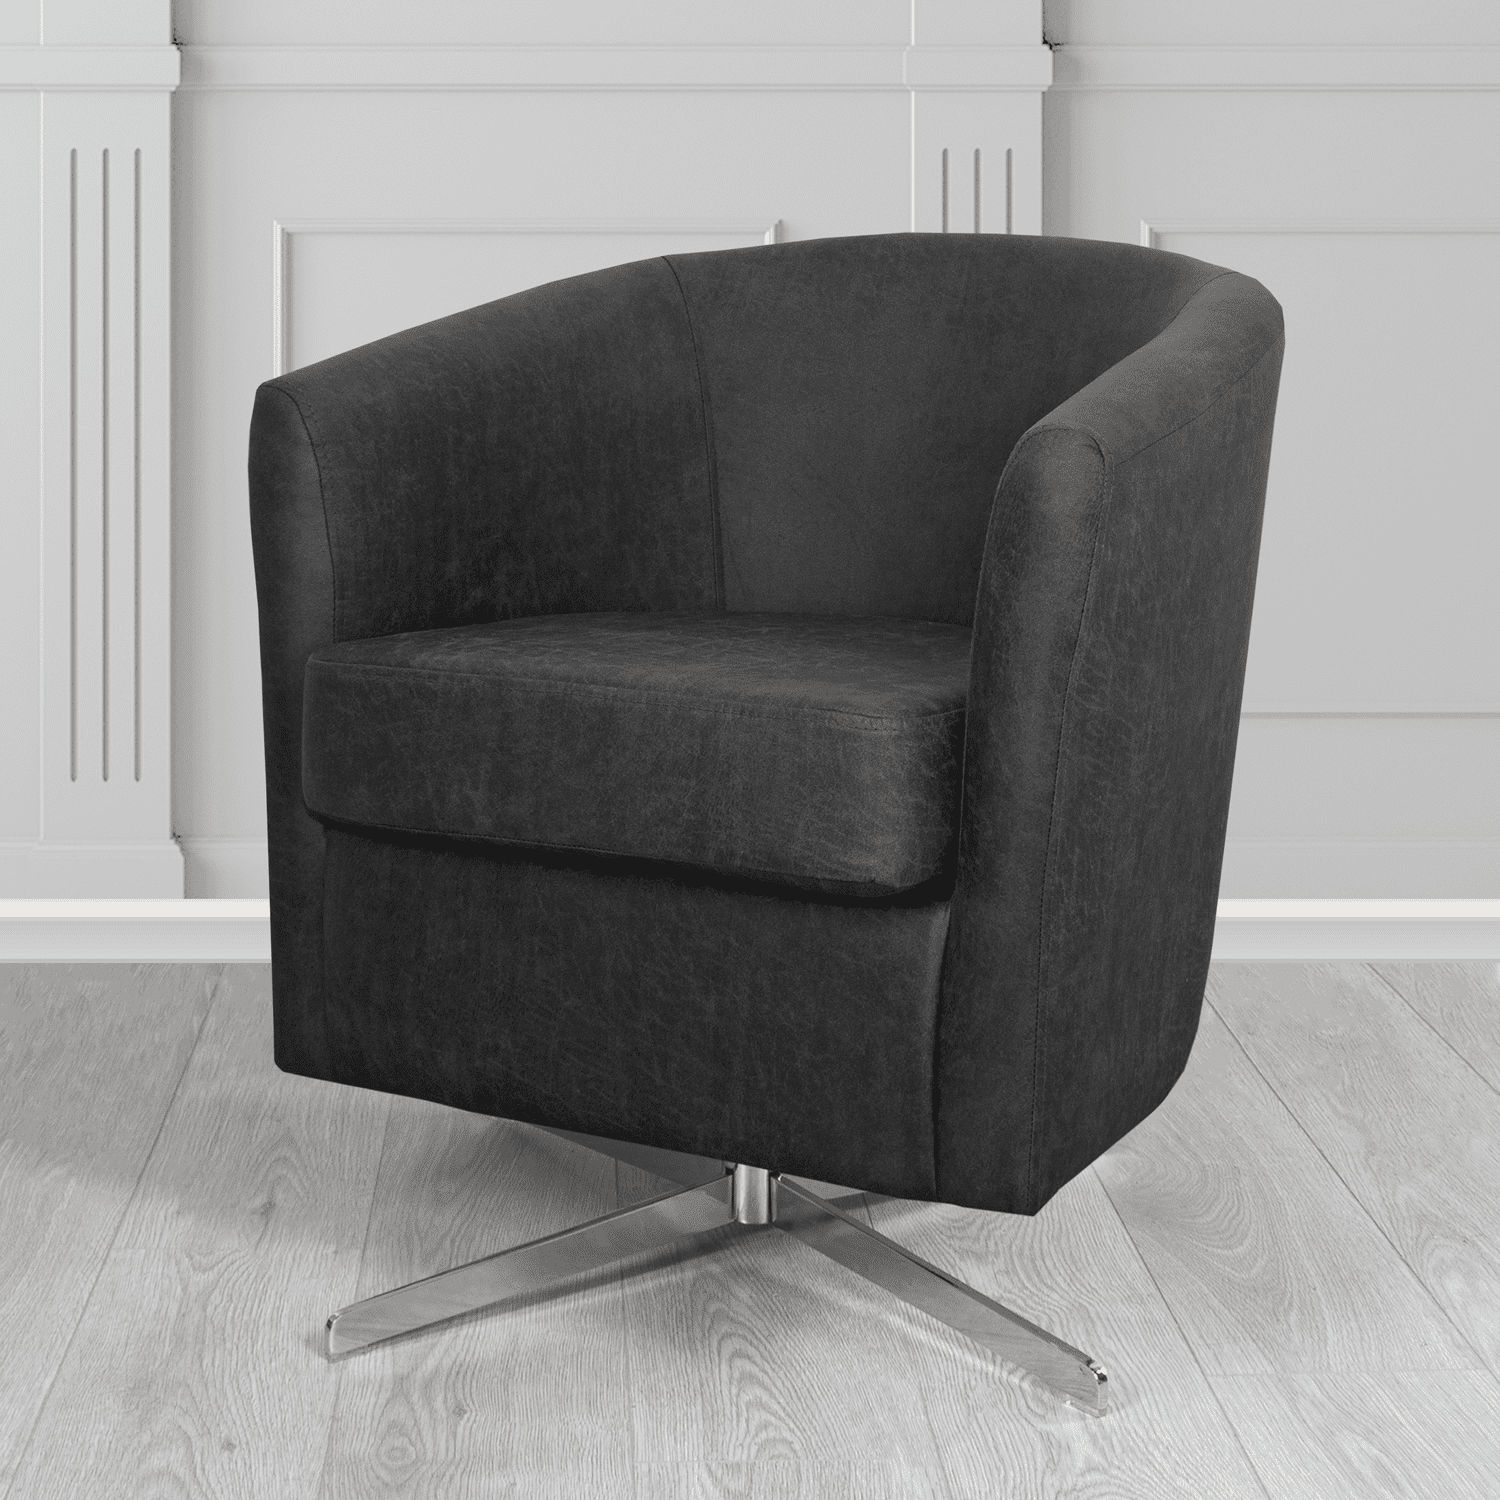 Cannes Swivel Tub Chair in Nevada Black Faux Leather - The Tub Chair Shop